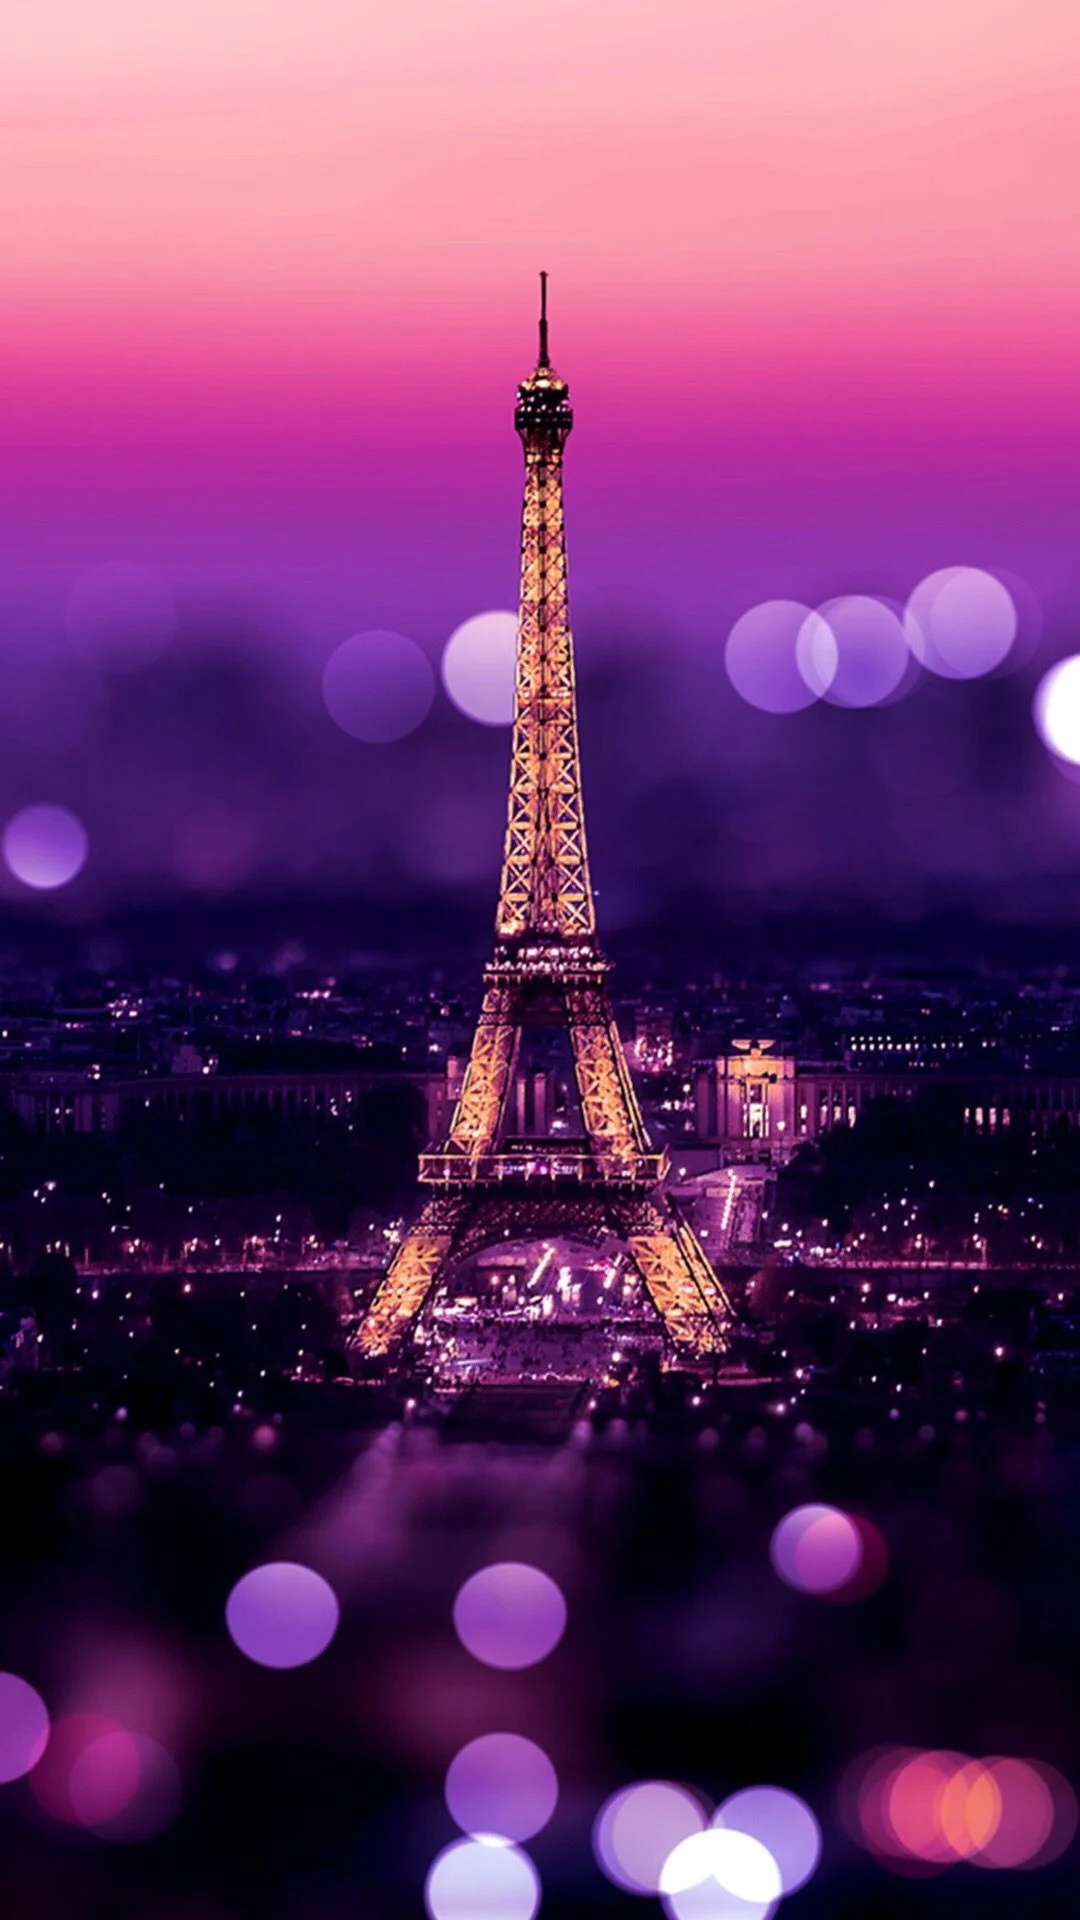 Paris: City of Light, Atmosphere, Nightscape. 1080x1920 Full HD Background.